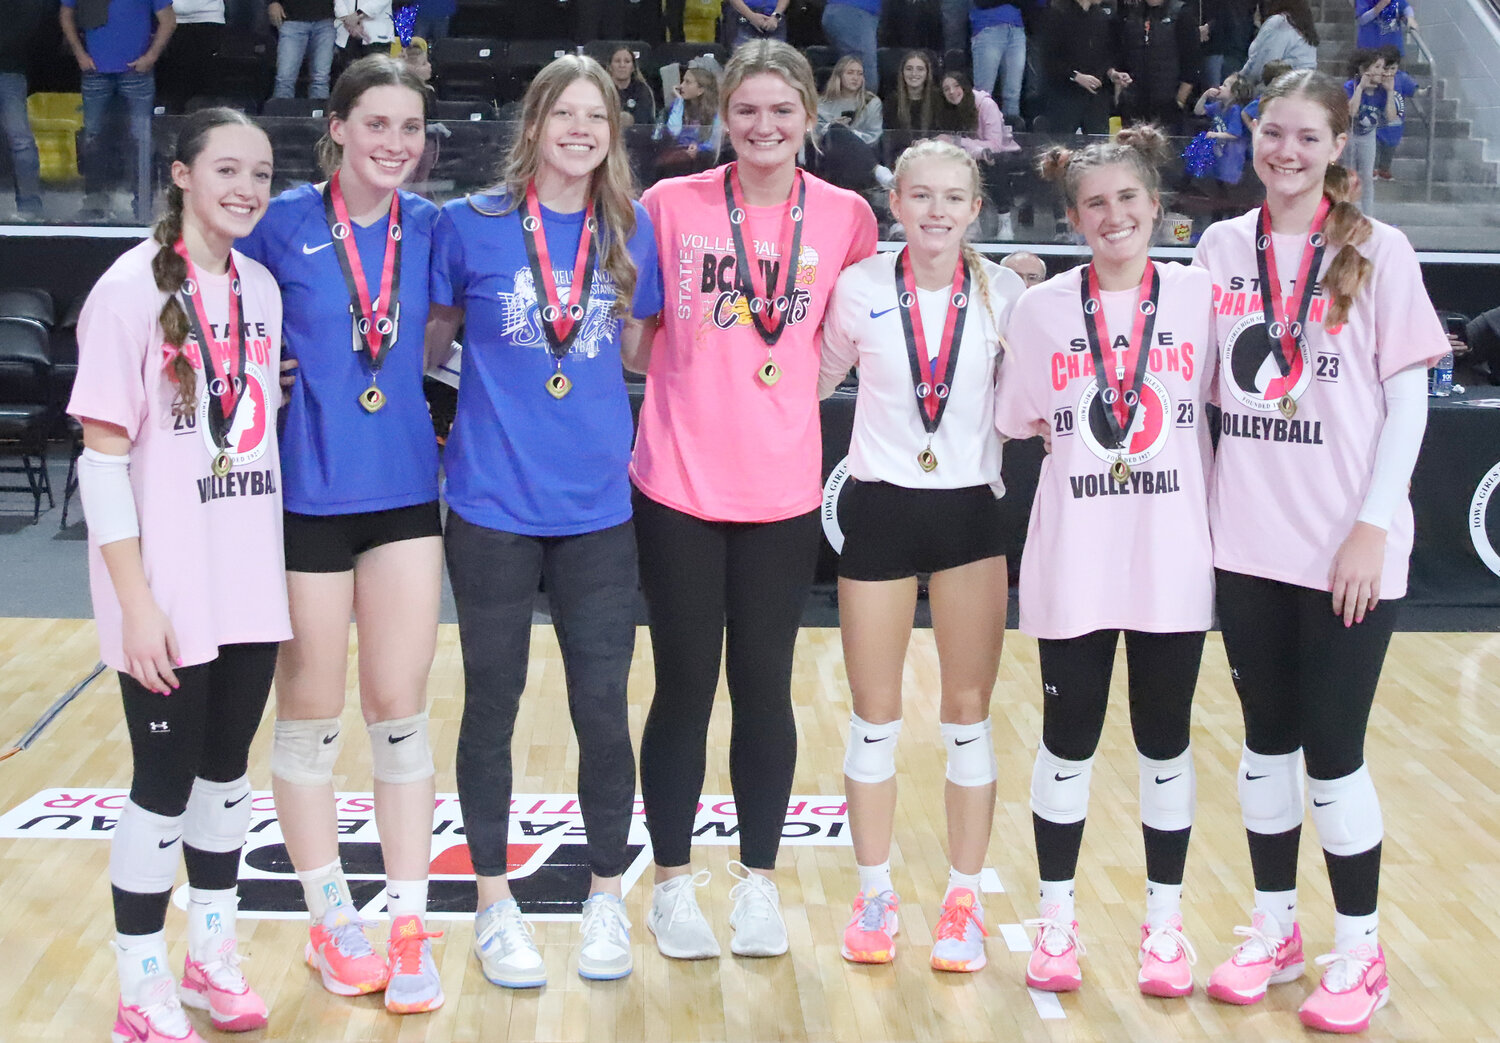 Holy Trinity's Mary Kate Bendlage second from left and Teagan Snaadt third from right were named to the Class 1A All-tournament team Thursday night.